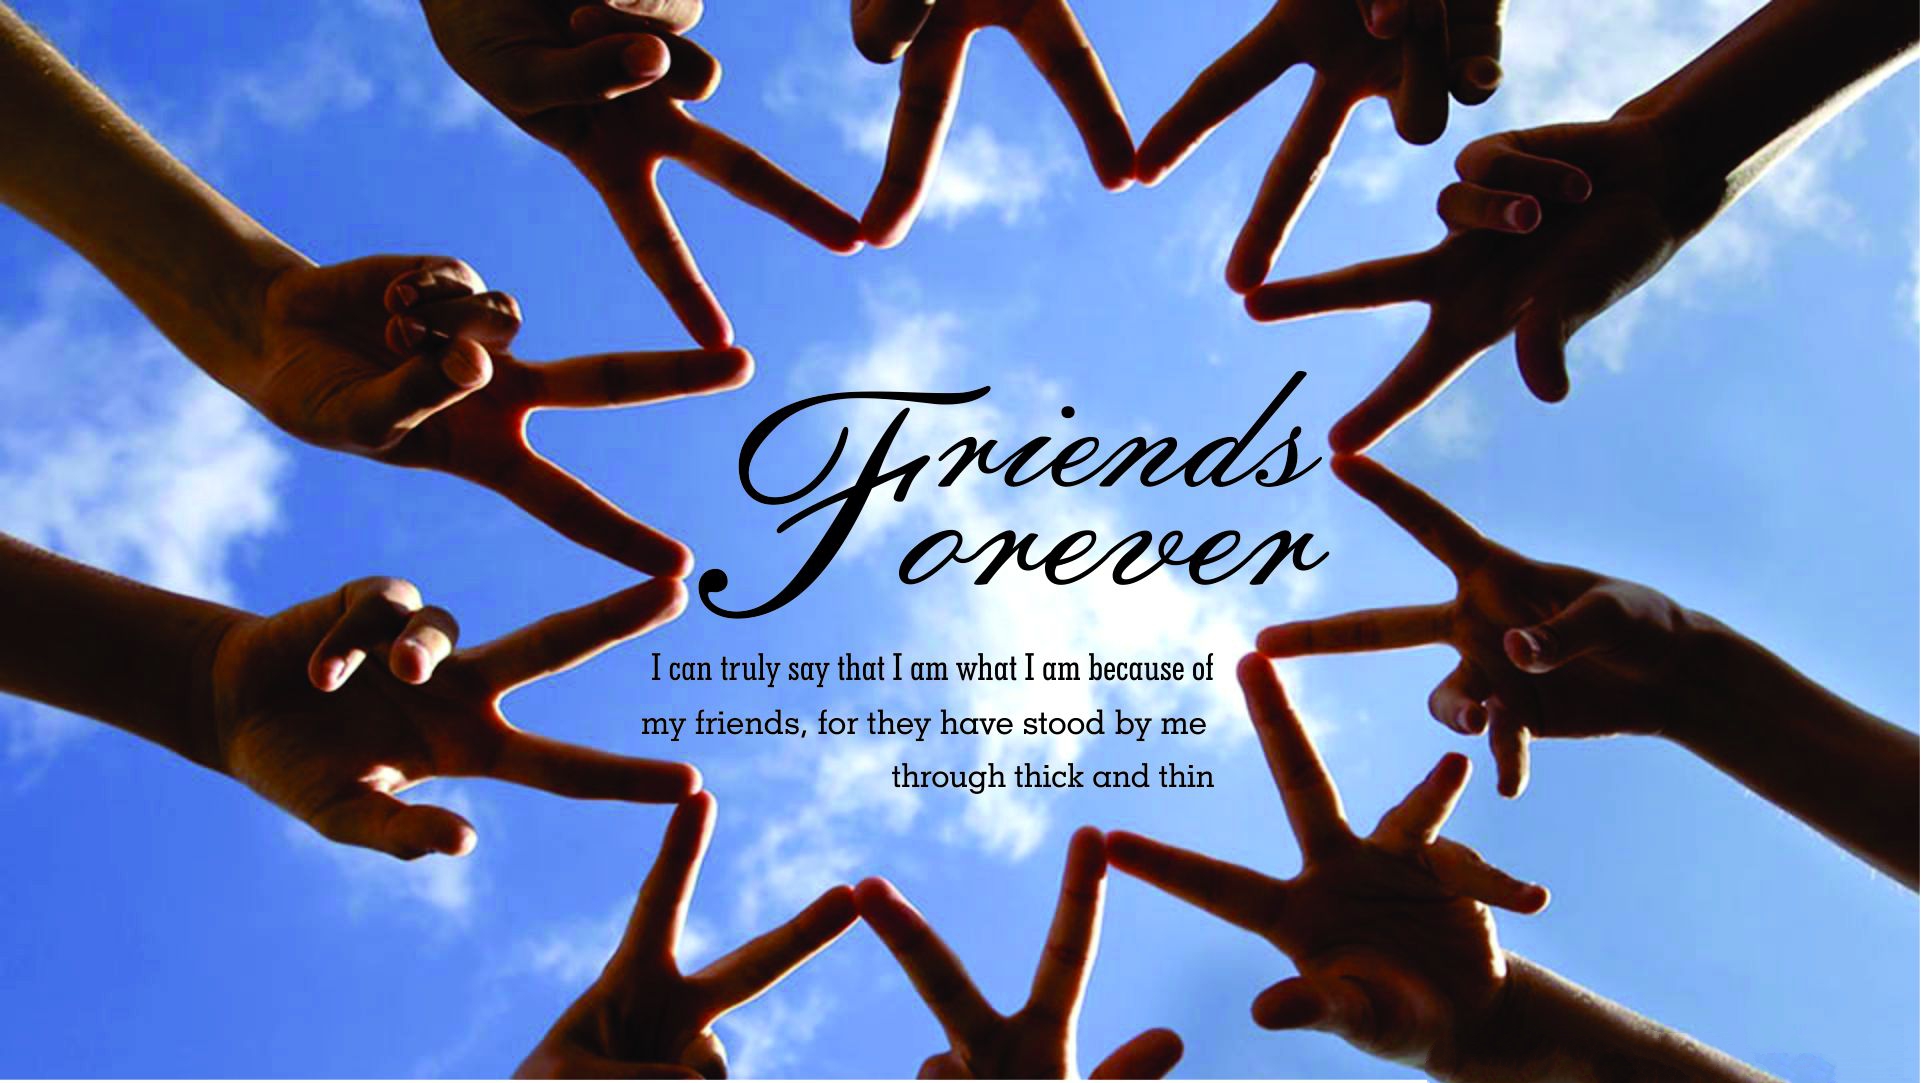 Best Friends Forever Background